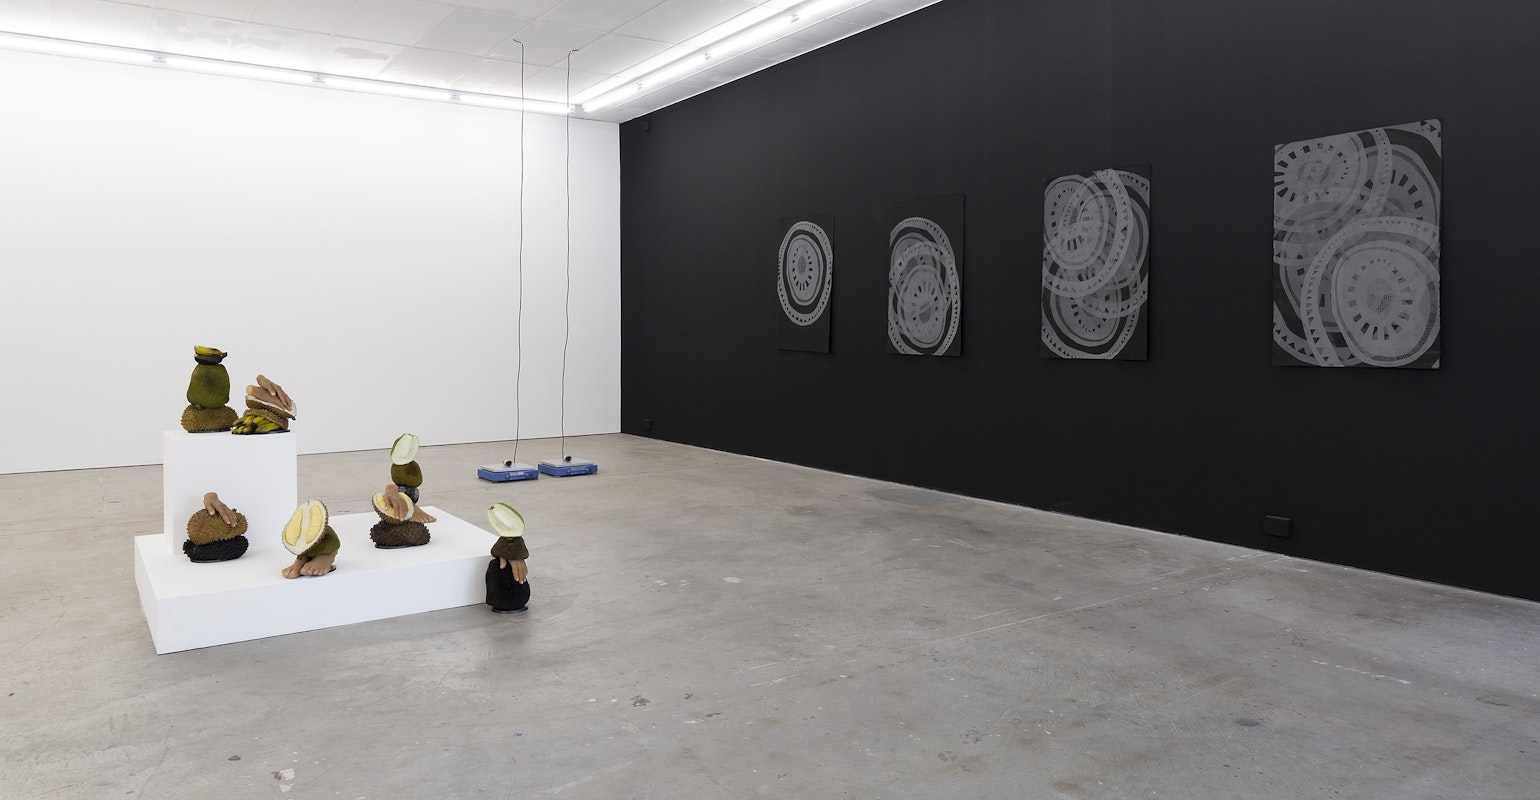 Installation view of Gertrude Studios 2023, featuring works by Nathan Beard, Dane Mitchell and Lisa Waup. Photo: Christian Capurro